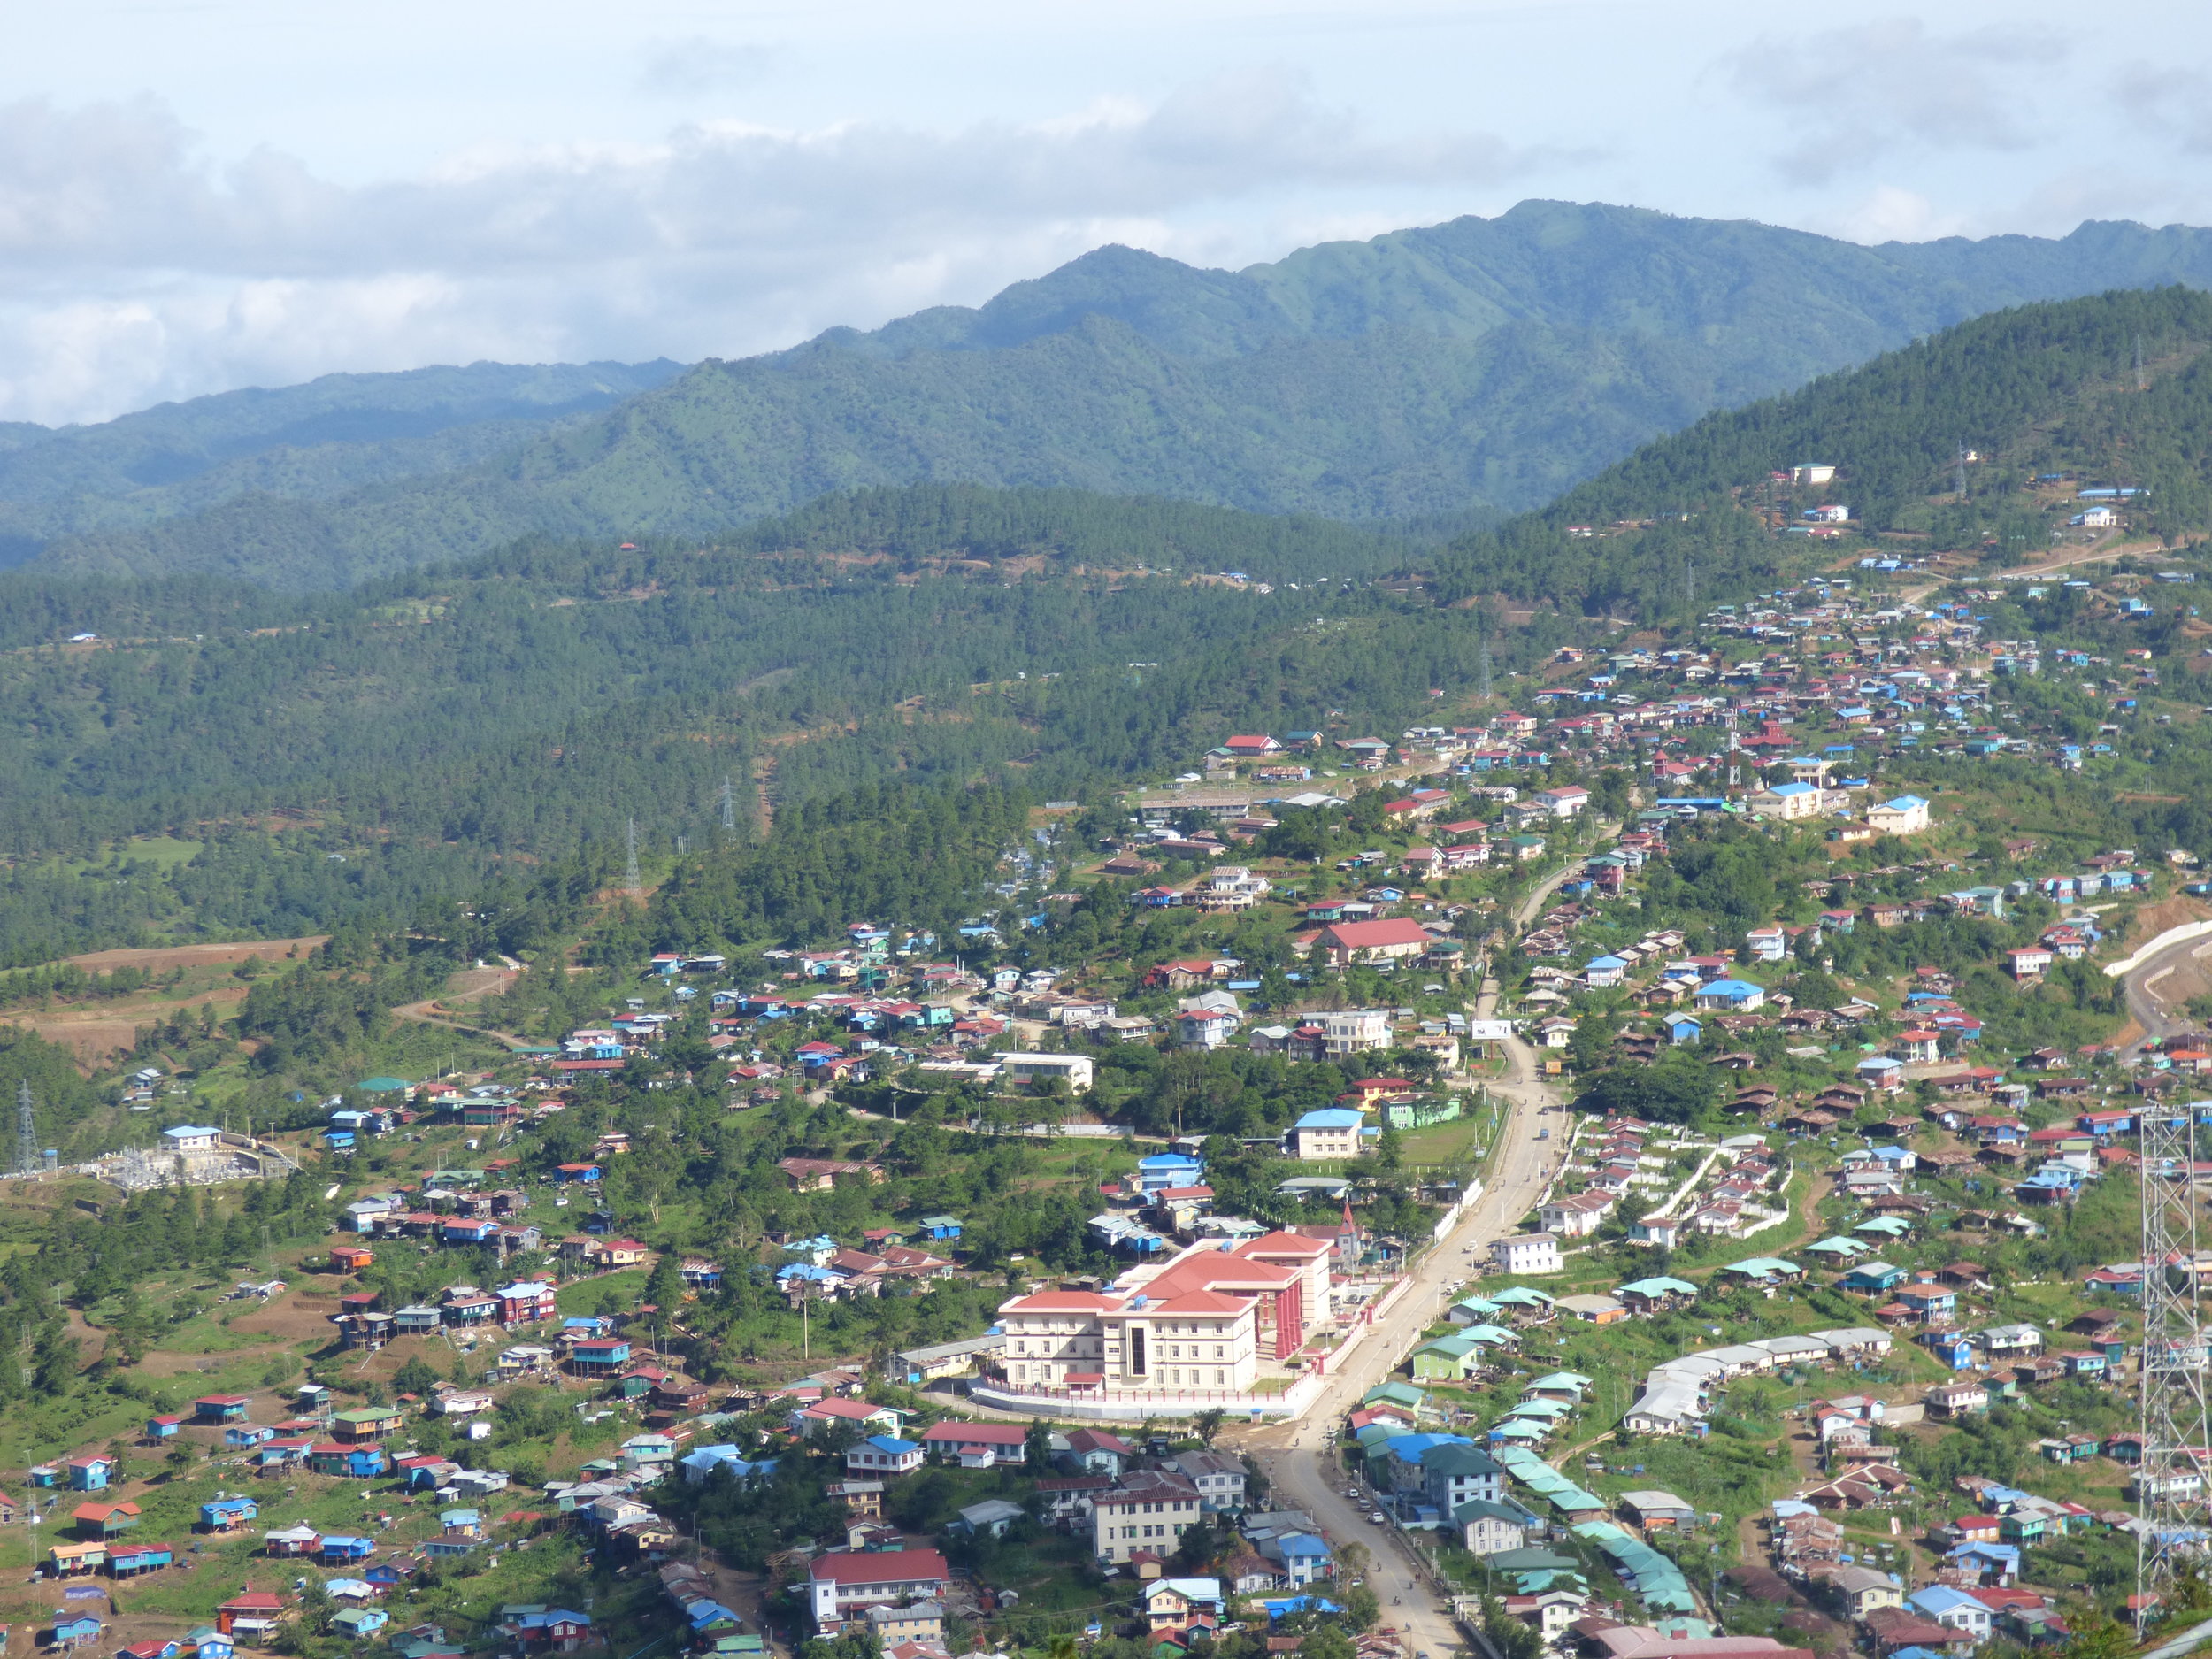 Hakha town with the State Parliament building prominent in the center